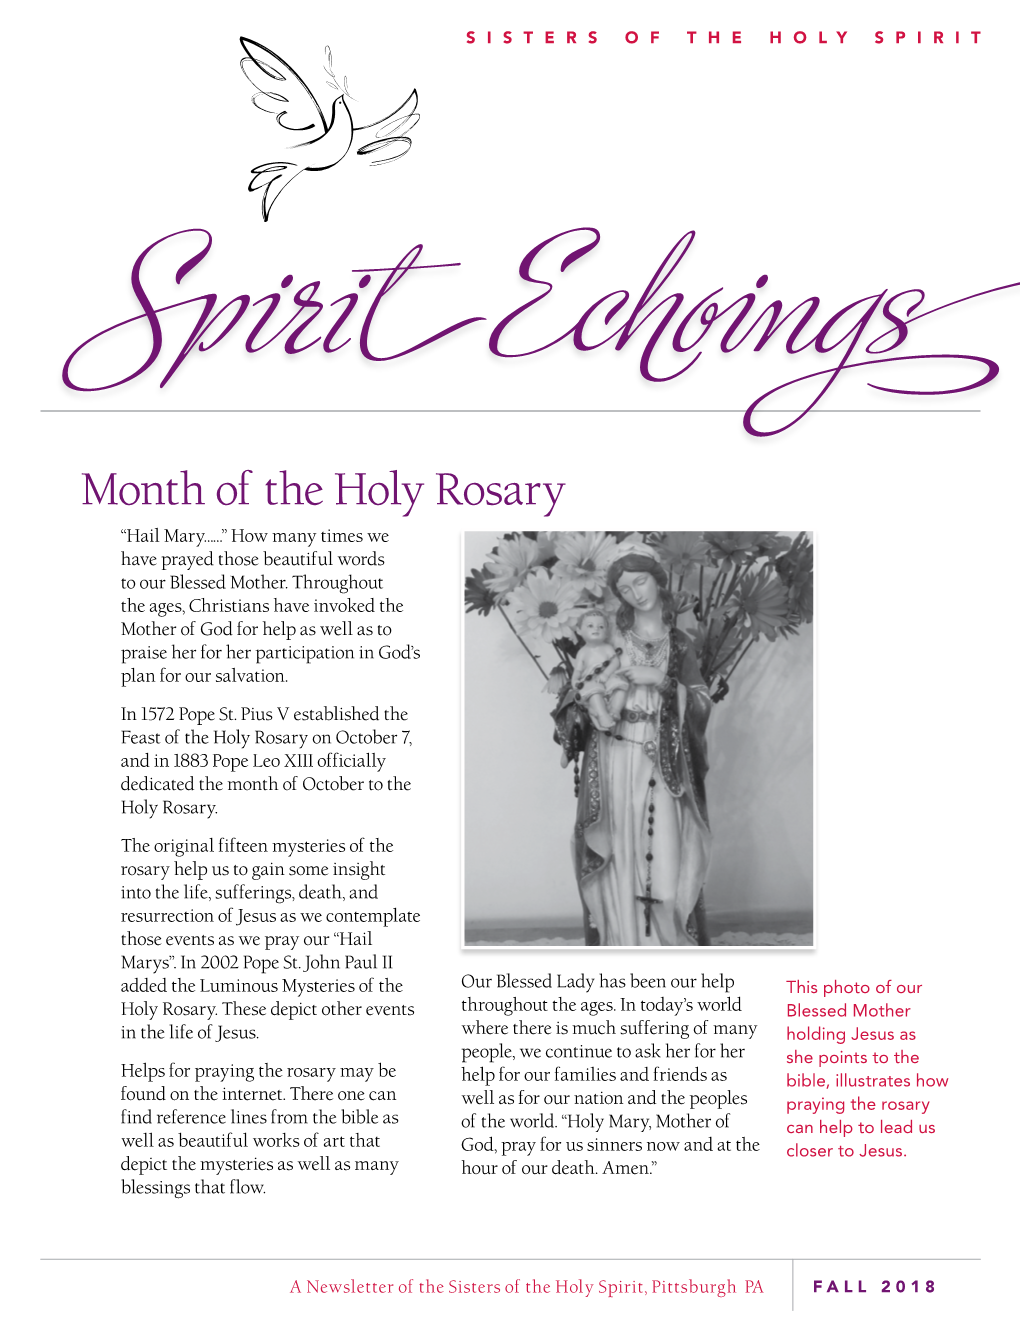 Month of the Holy Rosary “Hail Mary……” How Many Times We Have Prayed Those Beautiful Words to Our Blessed Mother